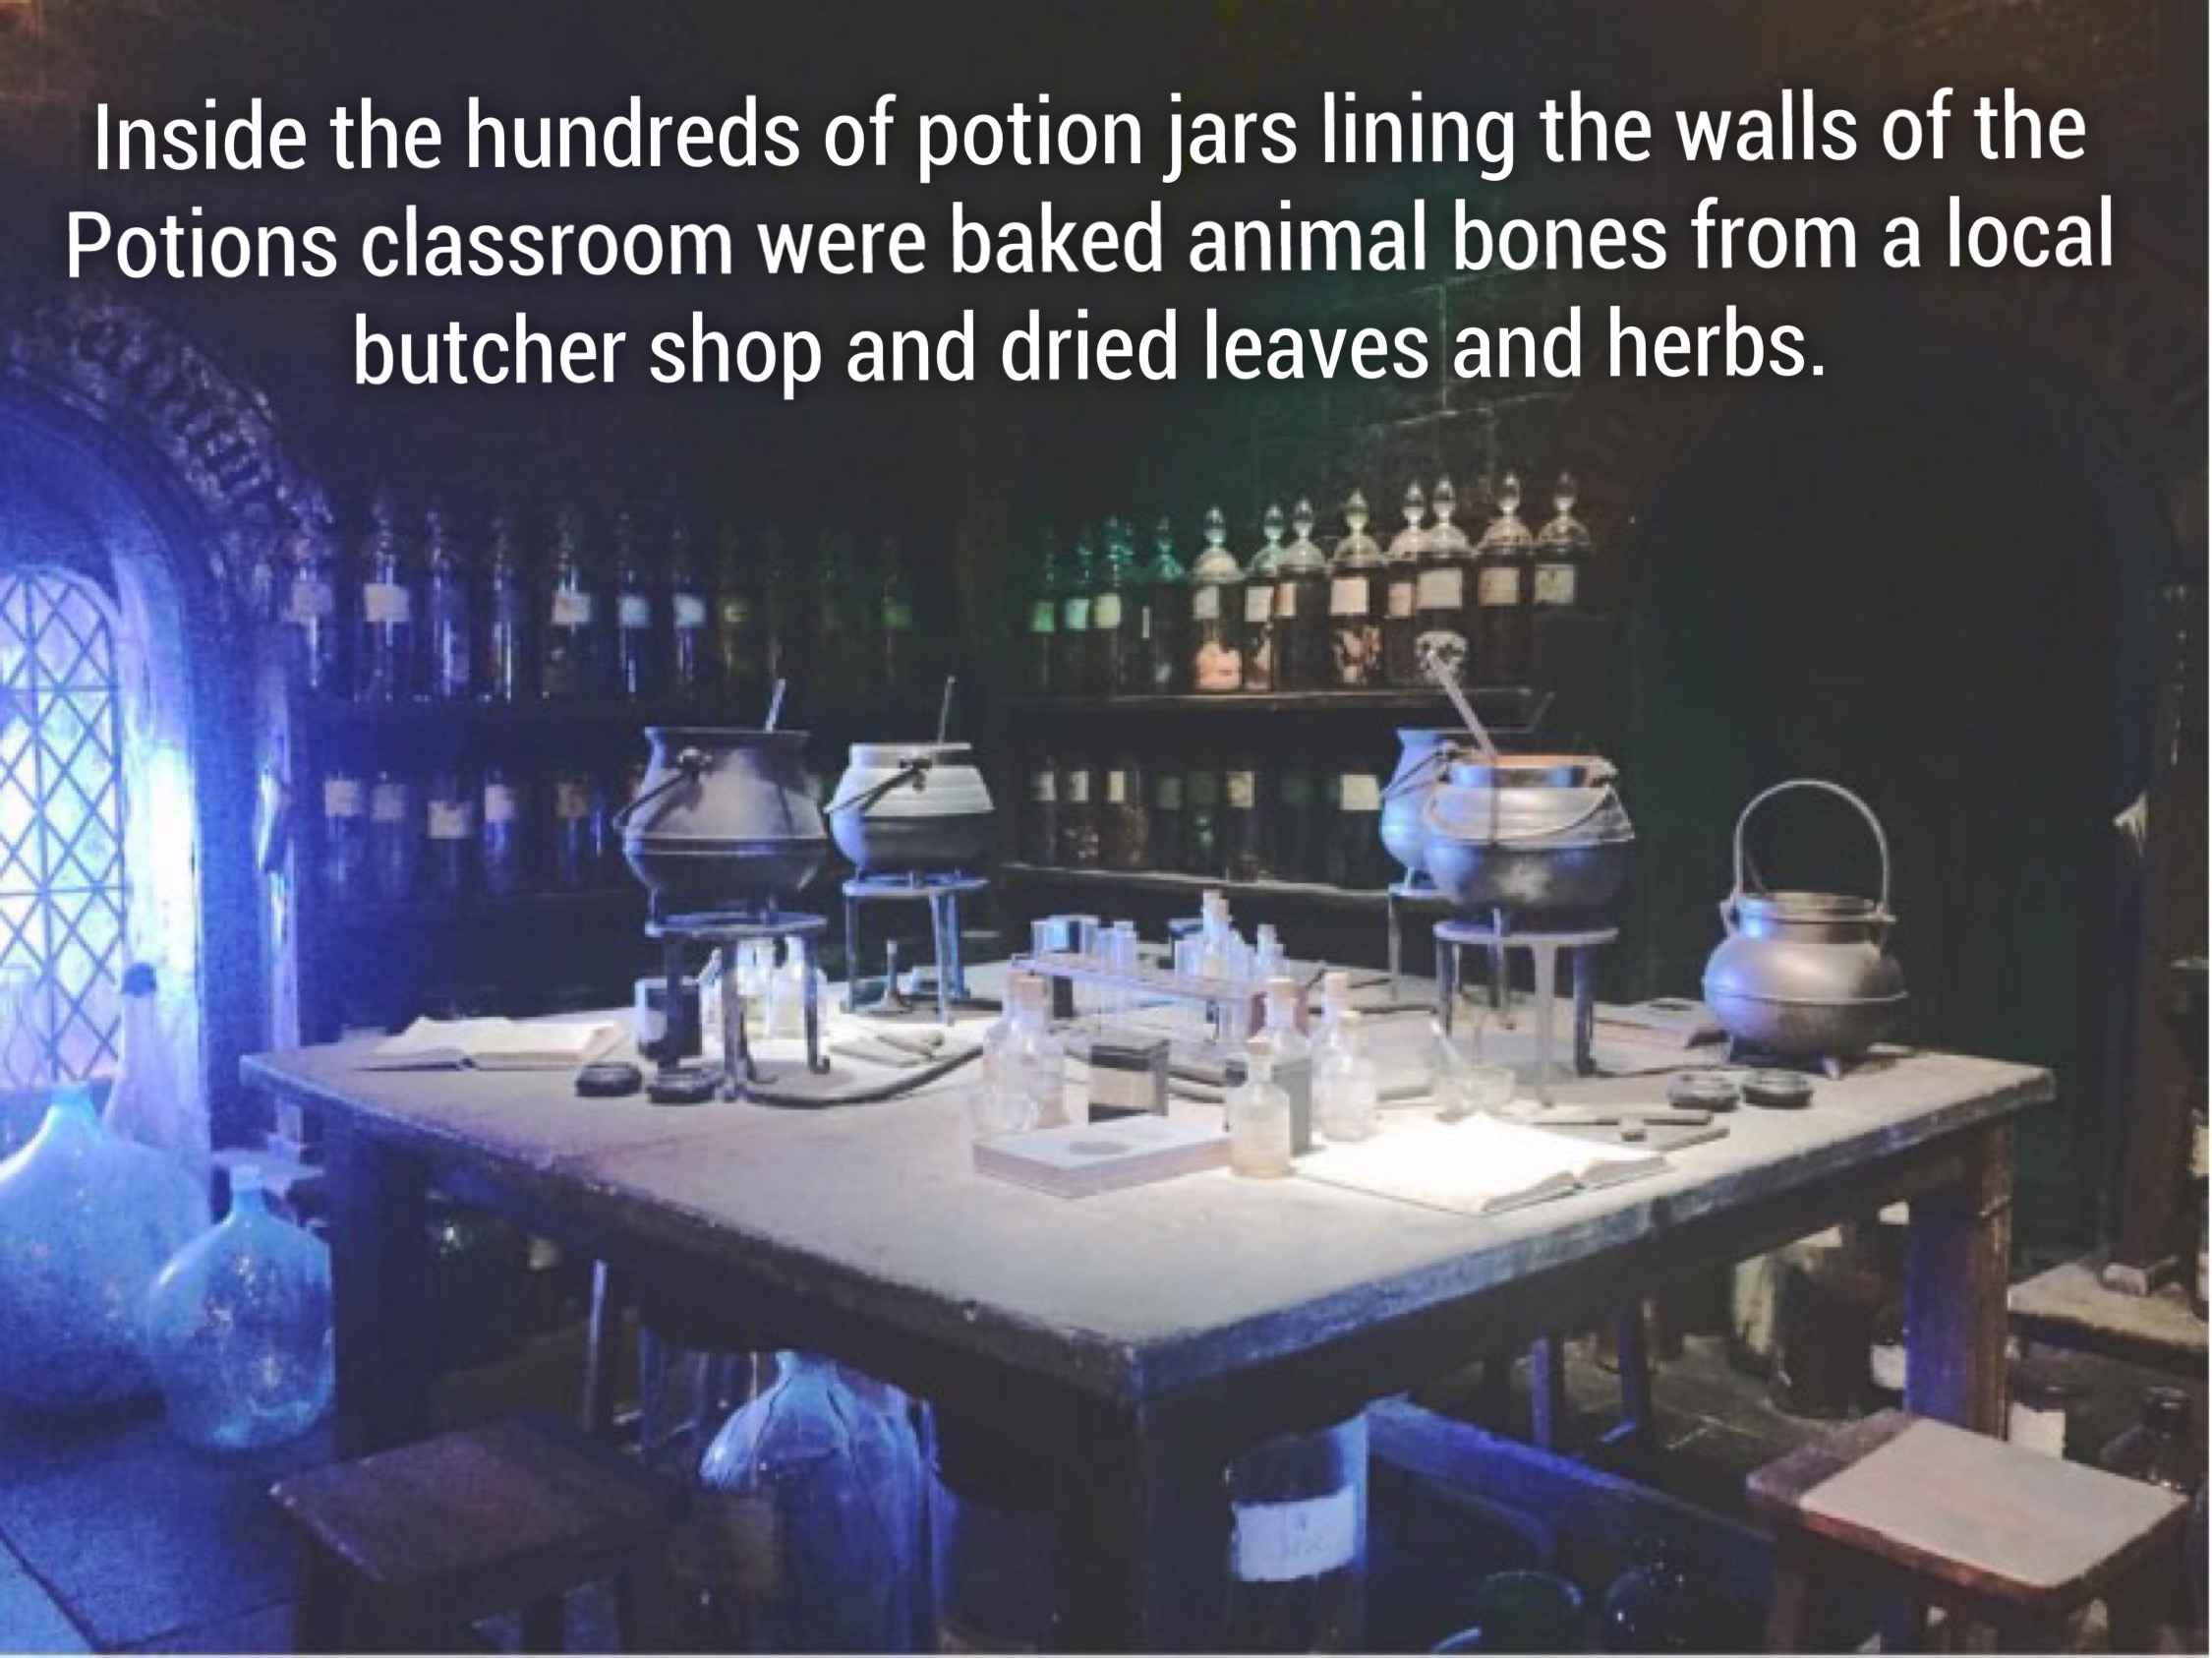 interior design - Inside the hundreds of potion jars lining the walls of the Potions classroom were baked animal bones from a local butcher shop and dried leaves and herbs.